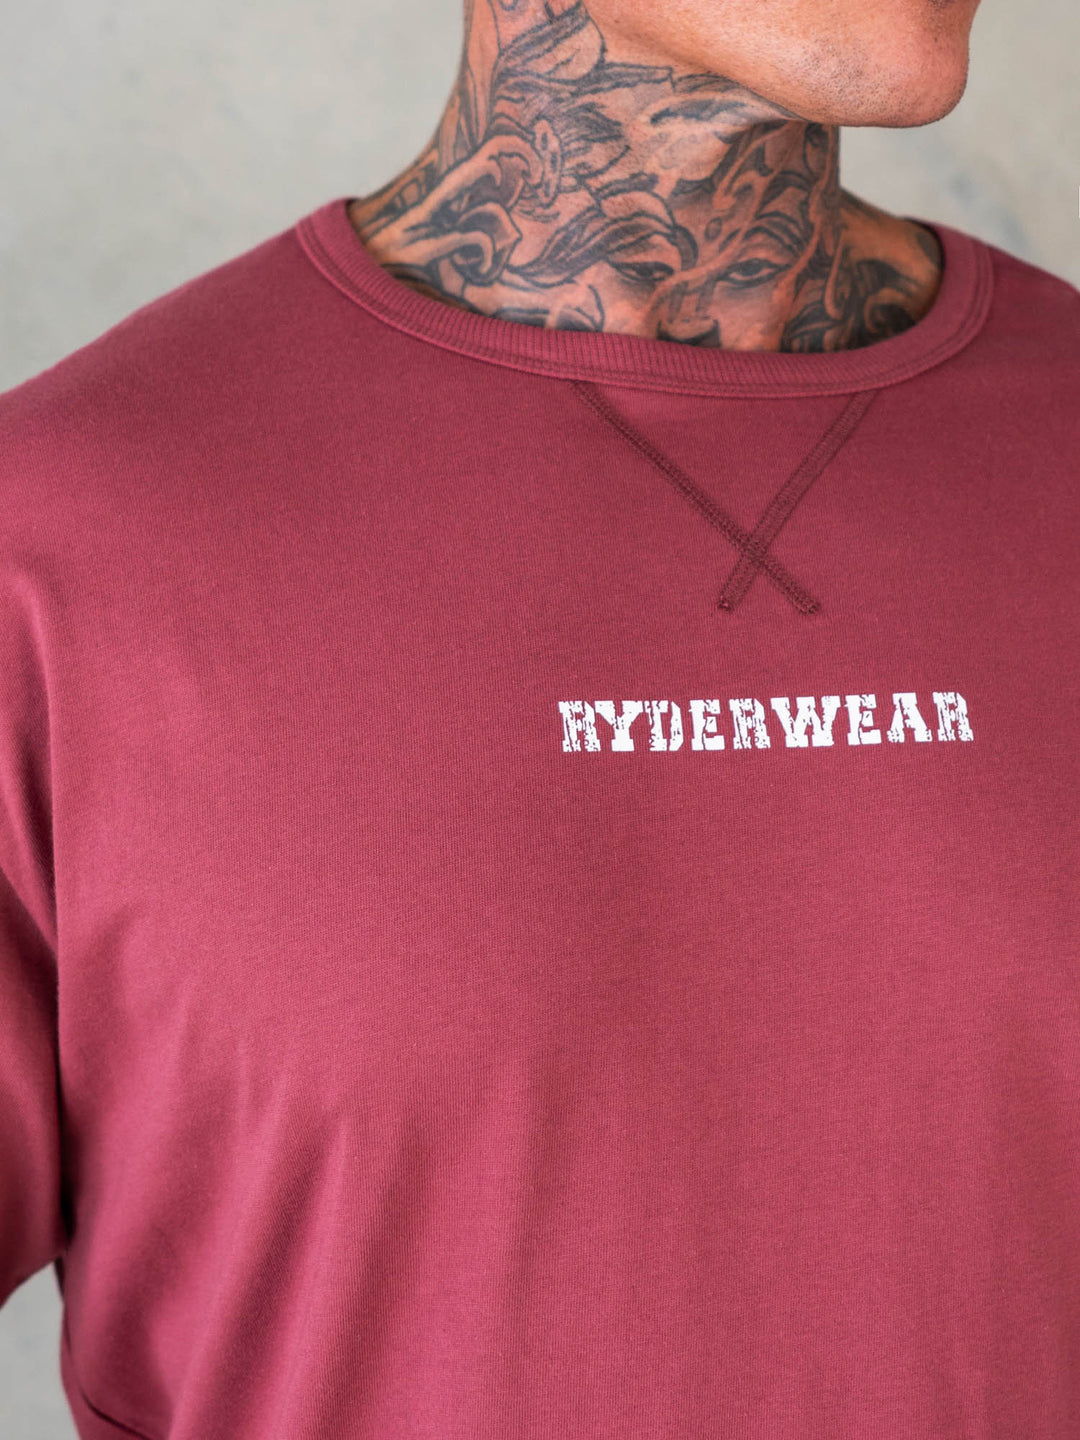 Octane T-Shirt - Red Oxide Clothing Ryderwear 